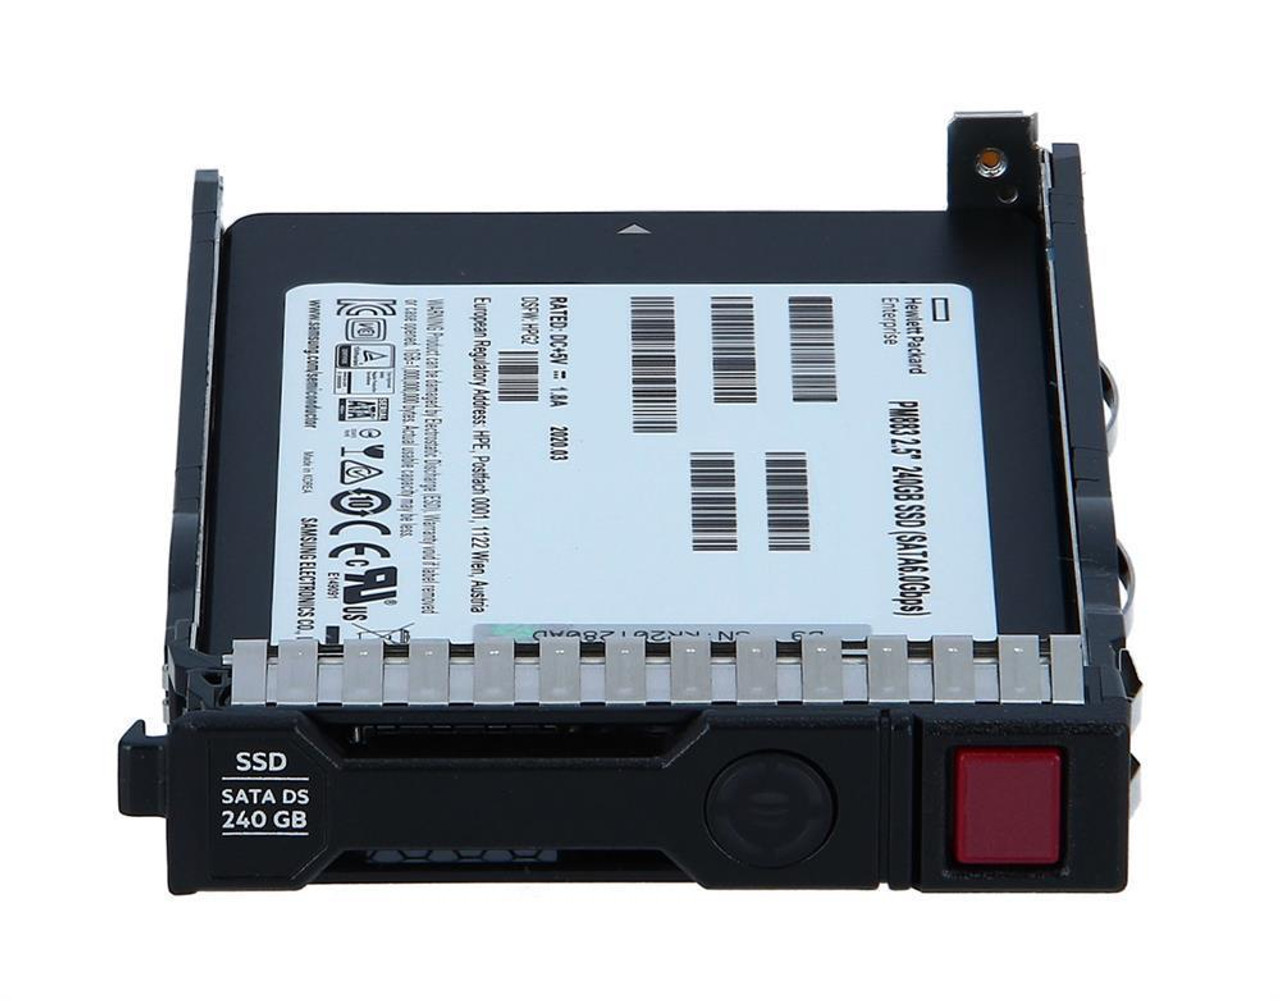 868814R-B21#0D1 HPE 240GB SATA 6Gbps Read Intensive 2.5-inch Internal Solid State Drive (SSD) with Smart Carrier